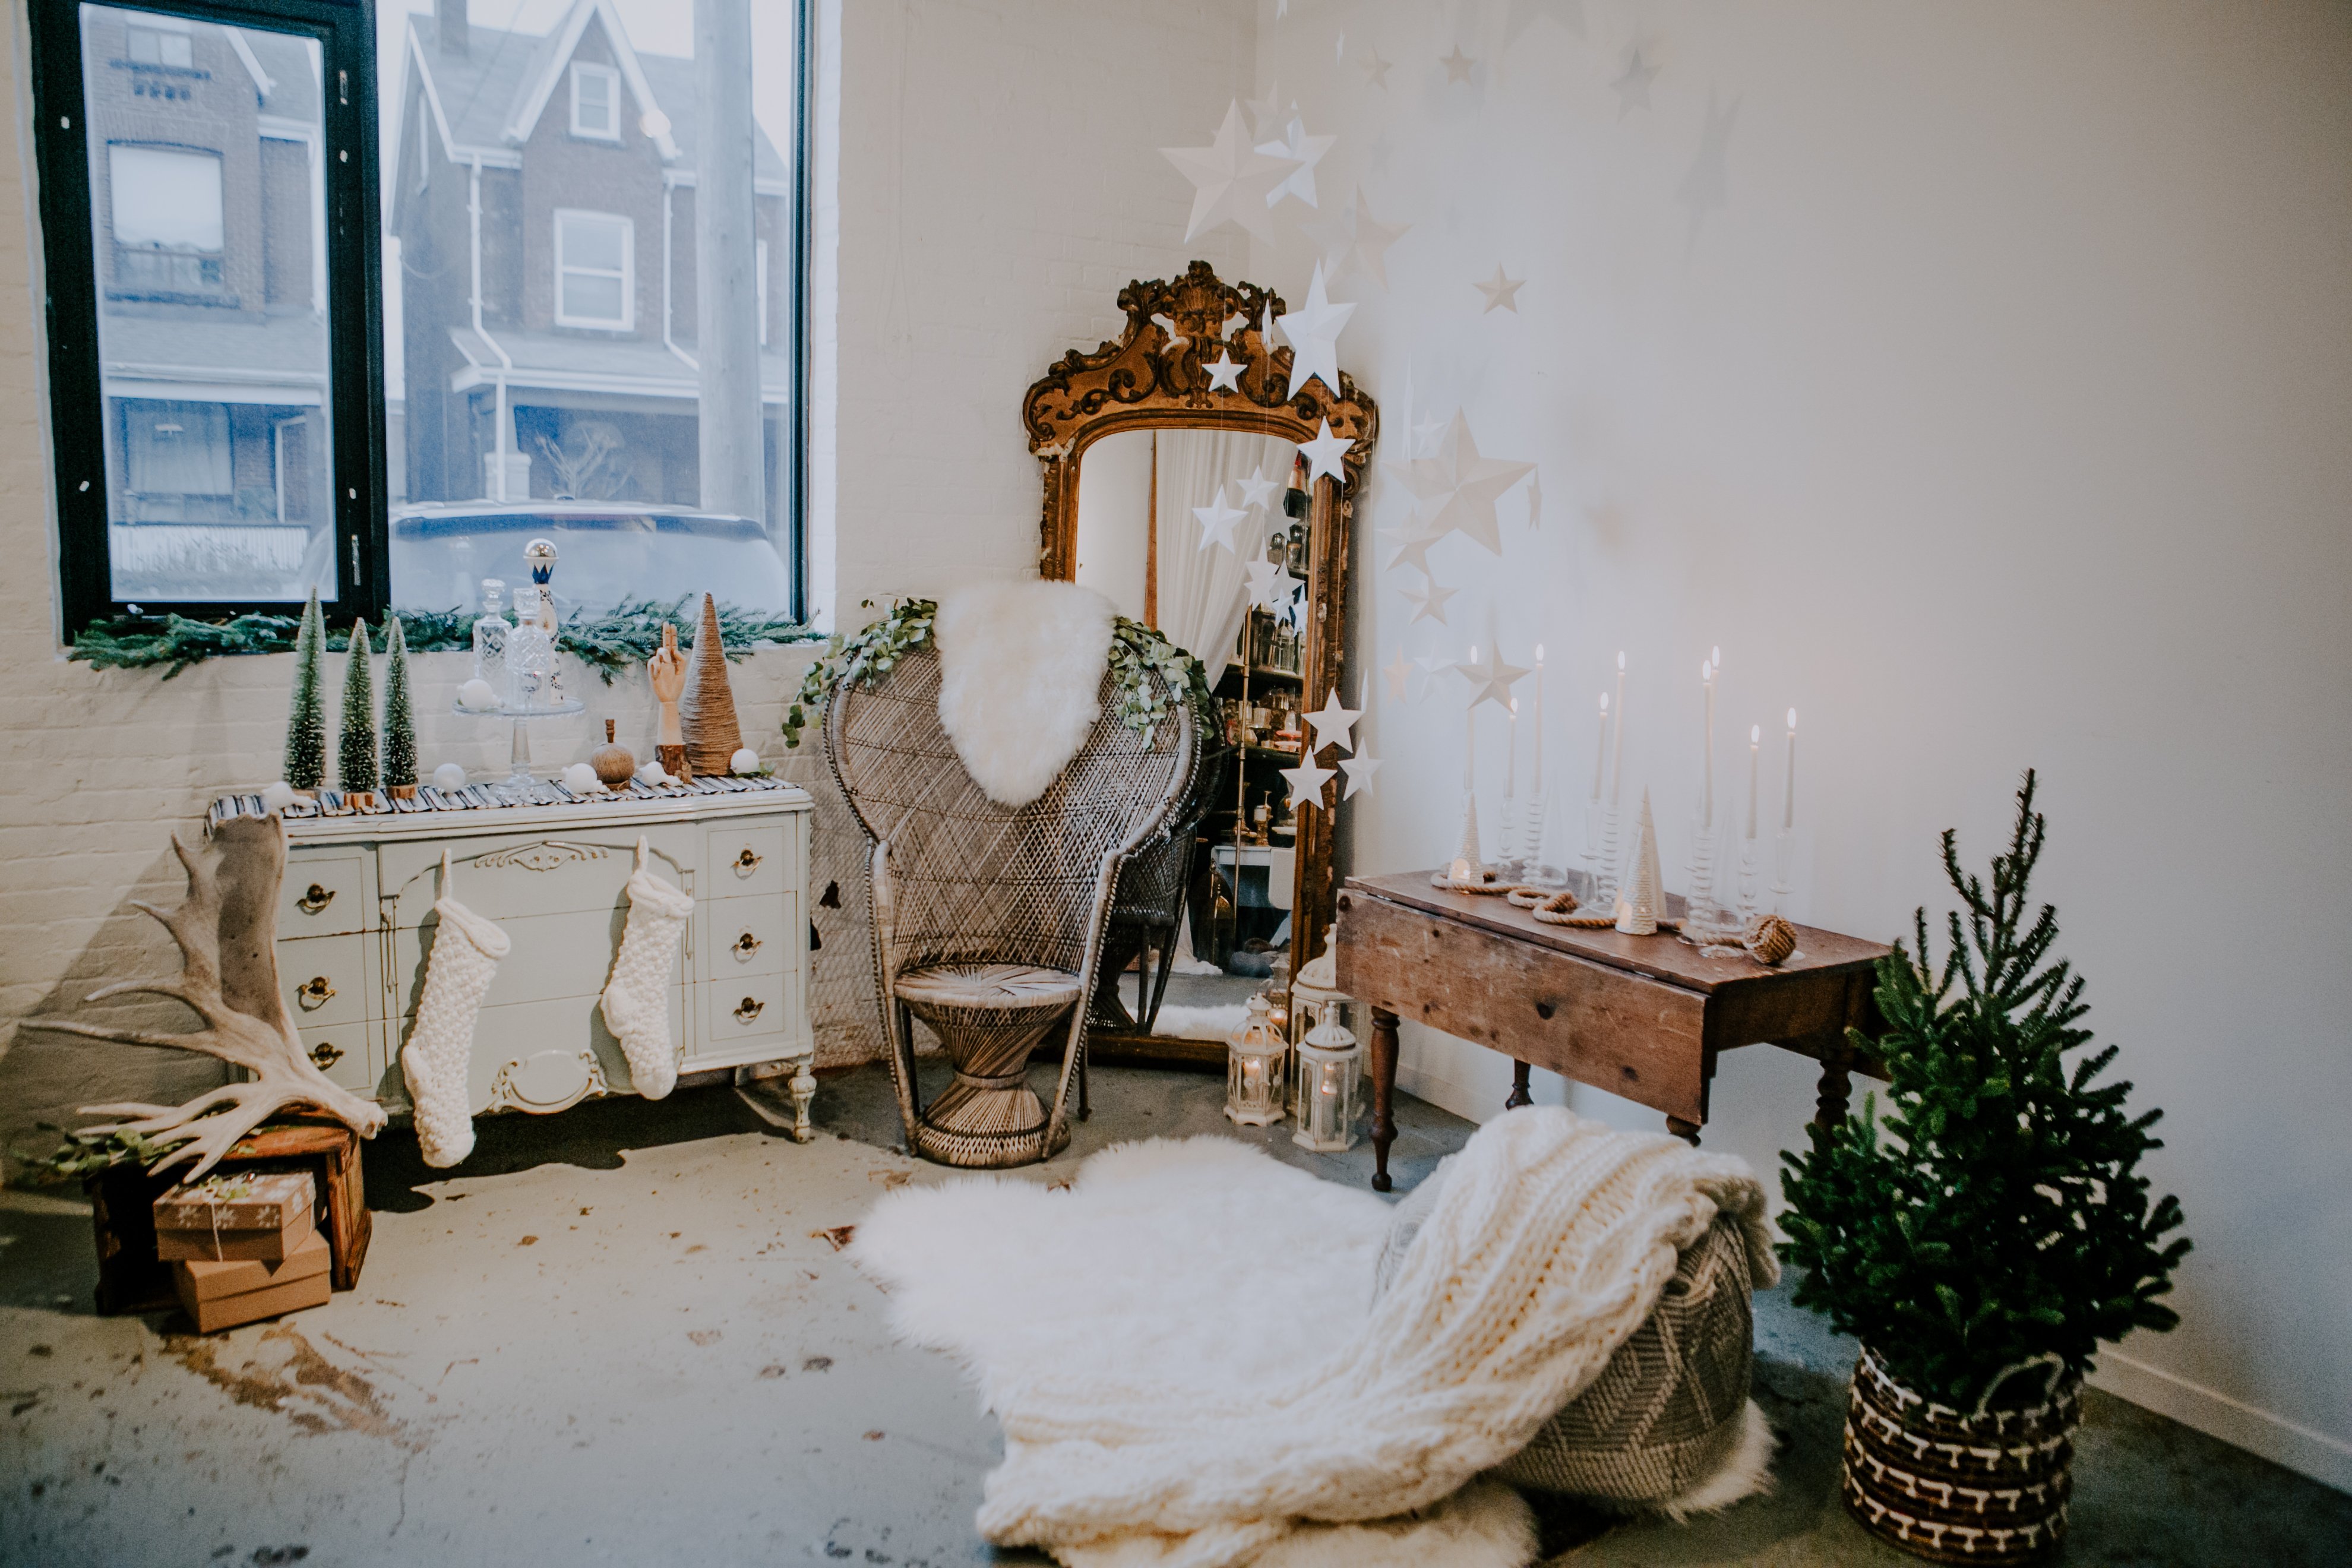 A white paper star installation hangs from the room of Olive Studio surrounded by a small fern tree, a vintage mirror in the corner, and faux fir throws and white knit stockings draping the furniture. 